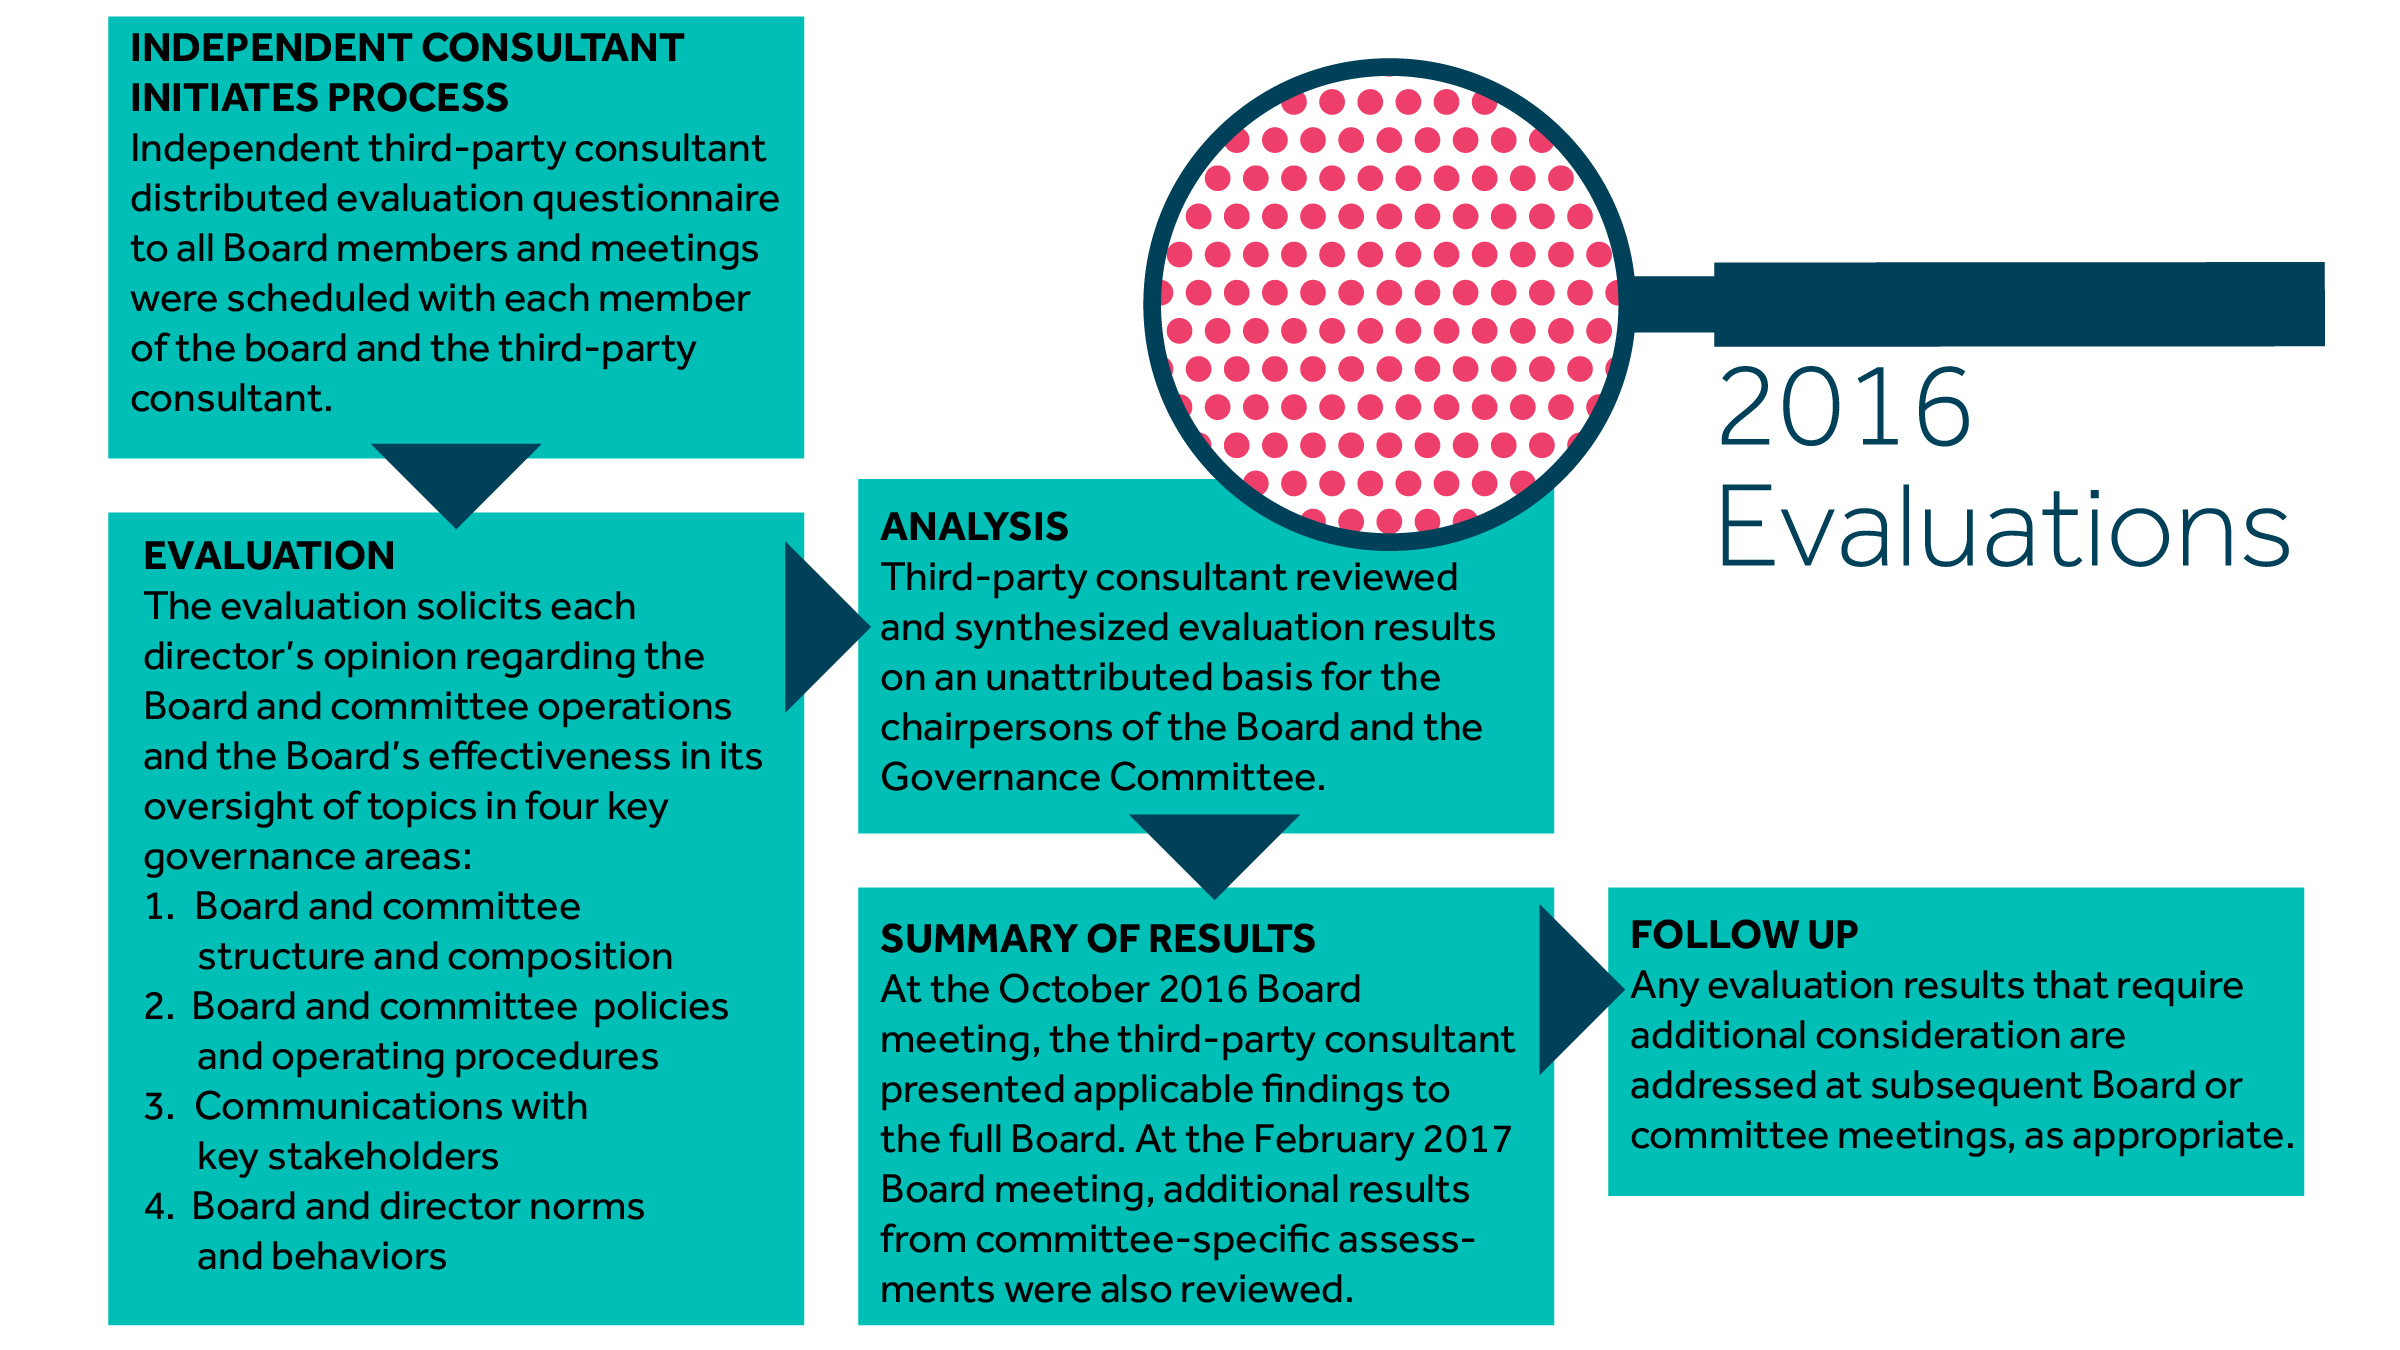 a2016evaluationsgraphic42016.jpg